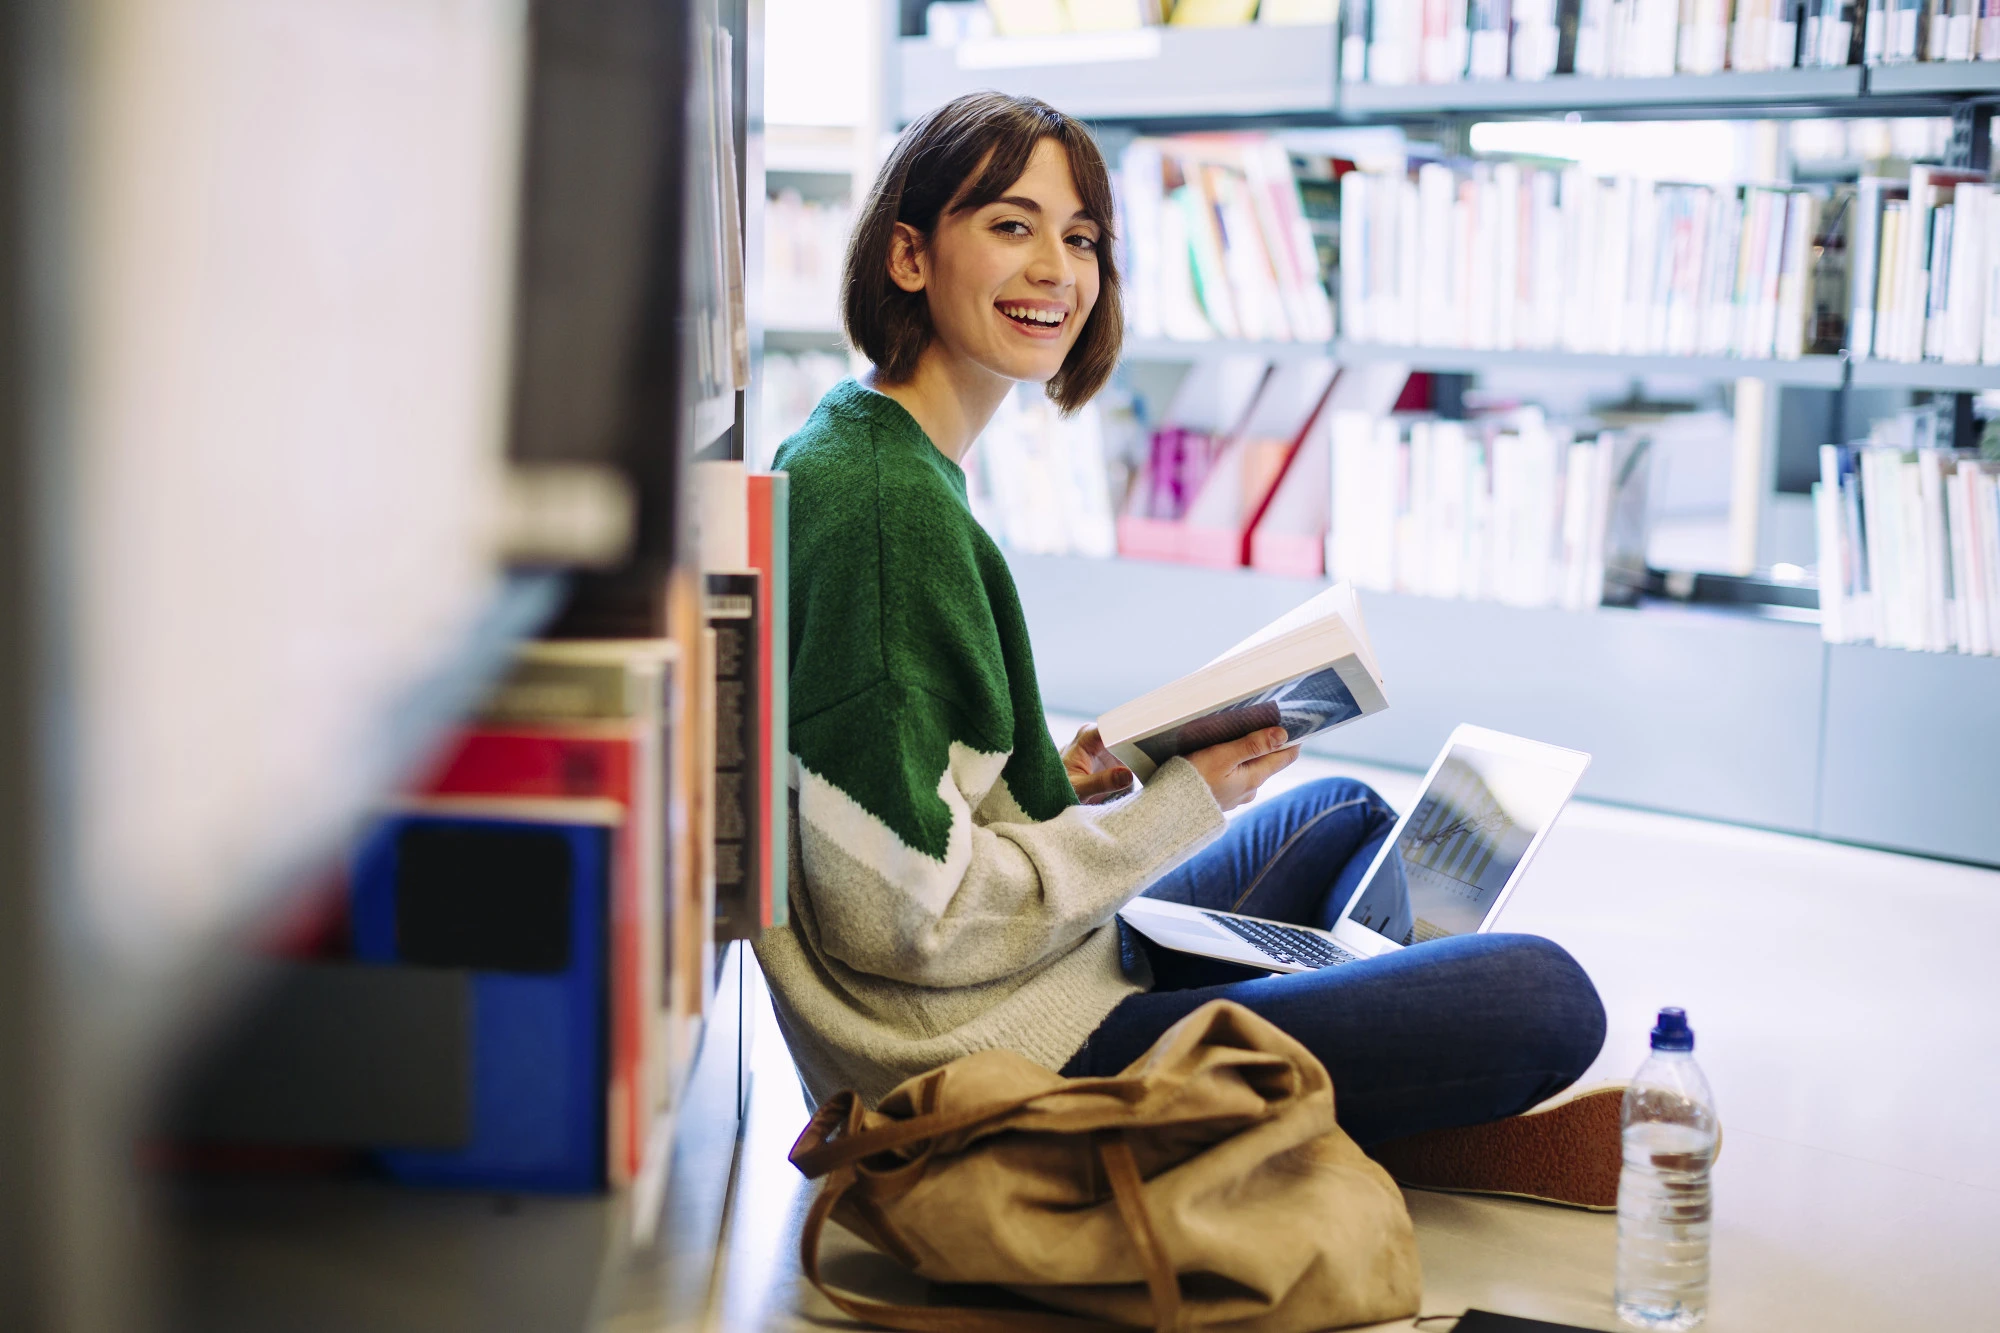 Smiling female student in a library